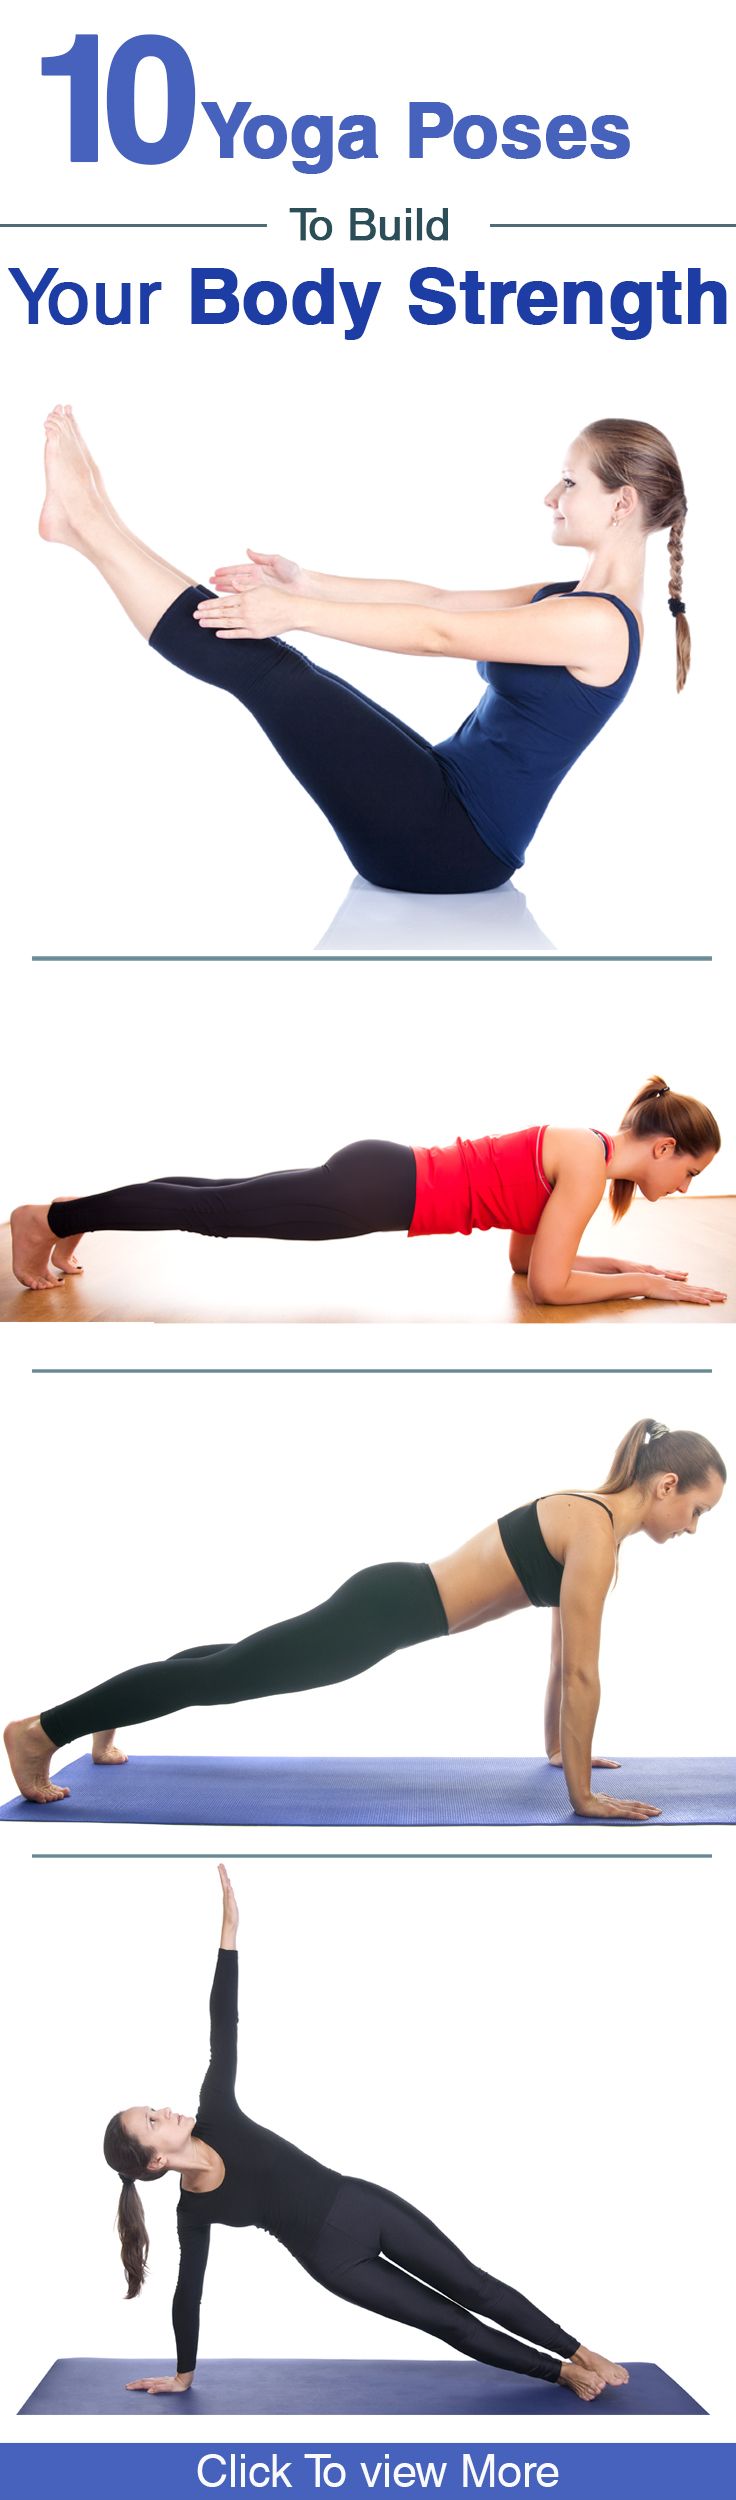 11 Effective Yoga Poses To Build Your Body Strength by stylecraze #Yoga #Strengt...